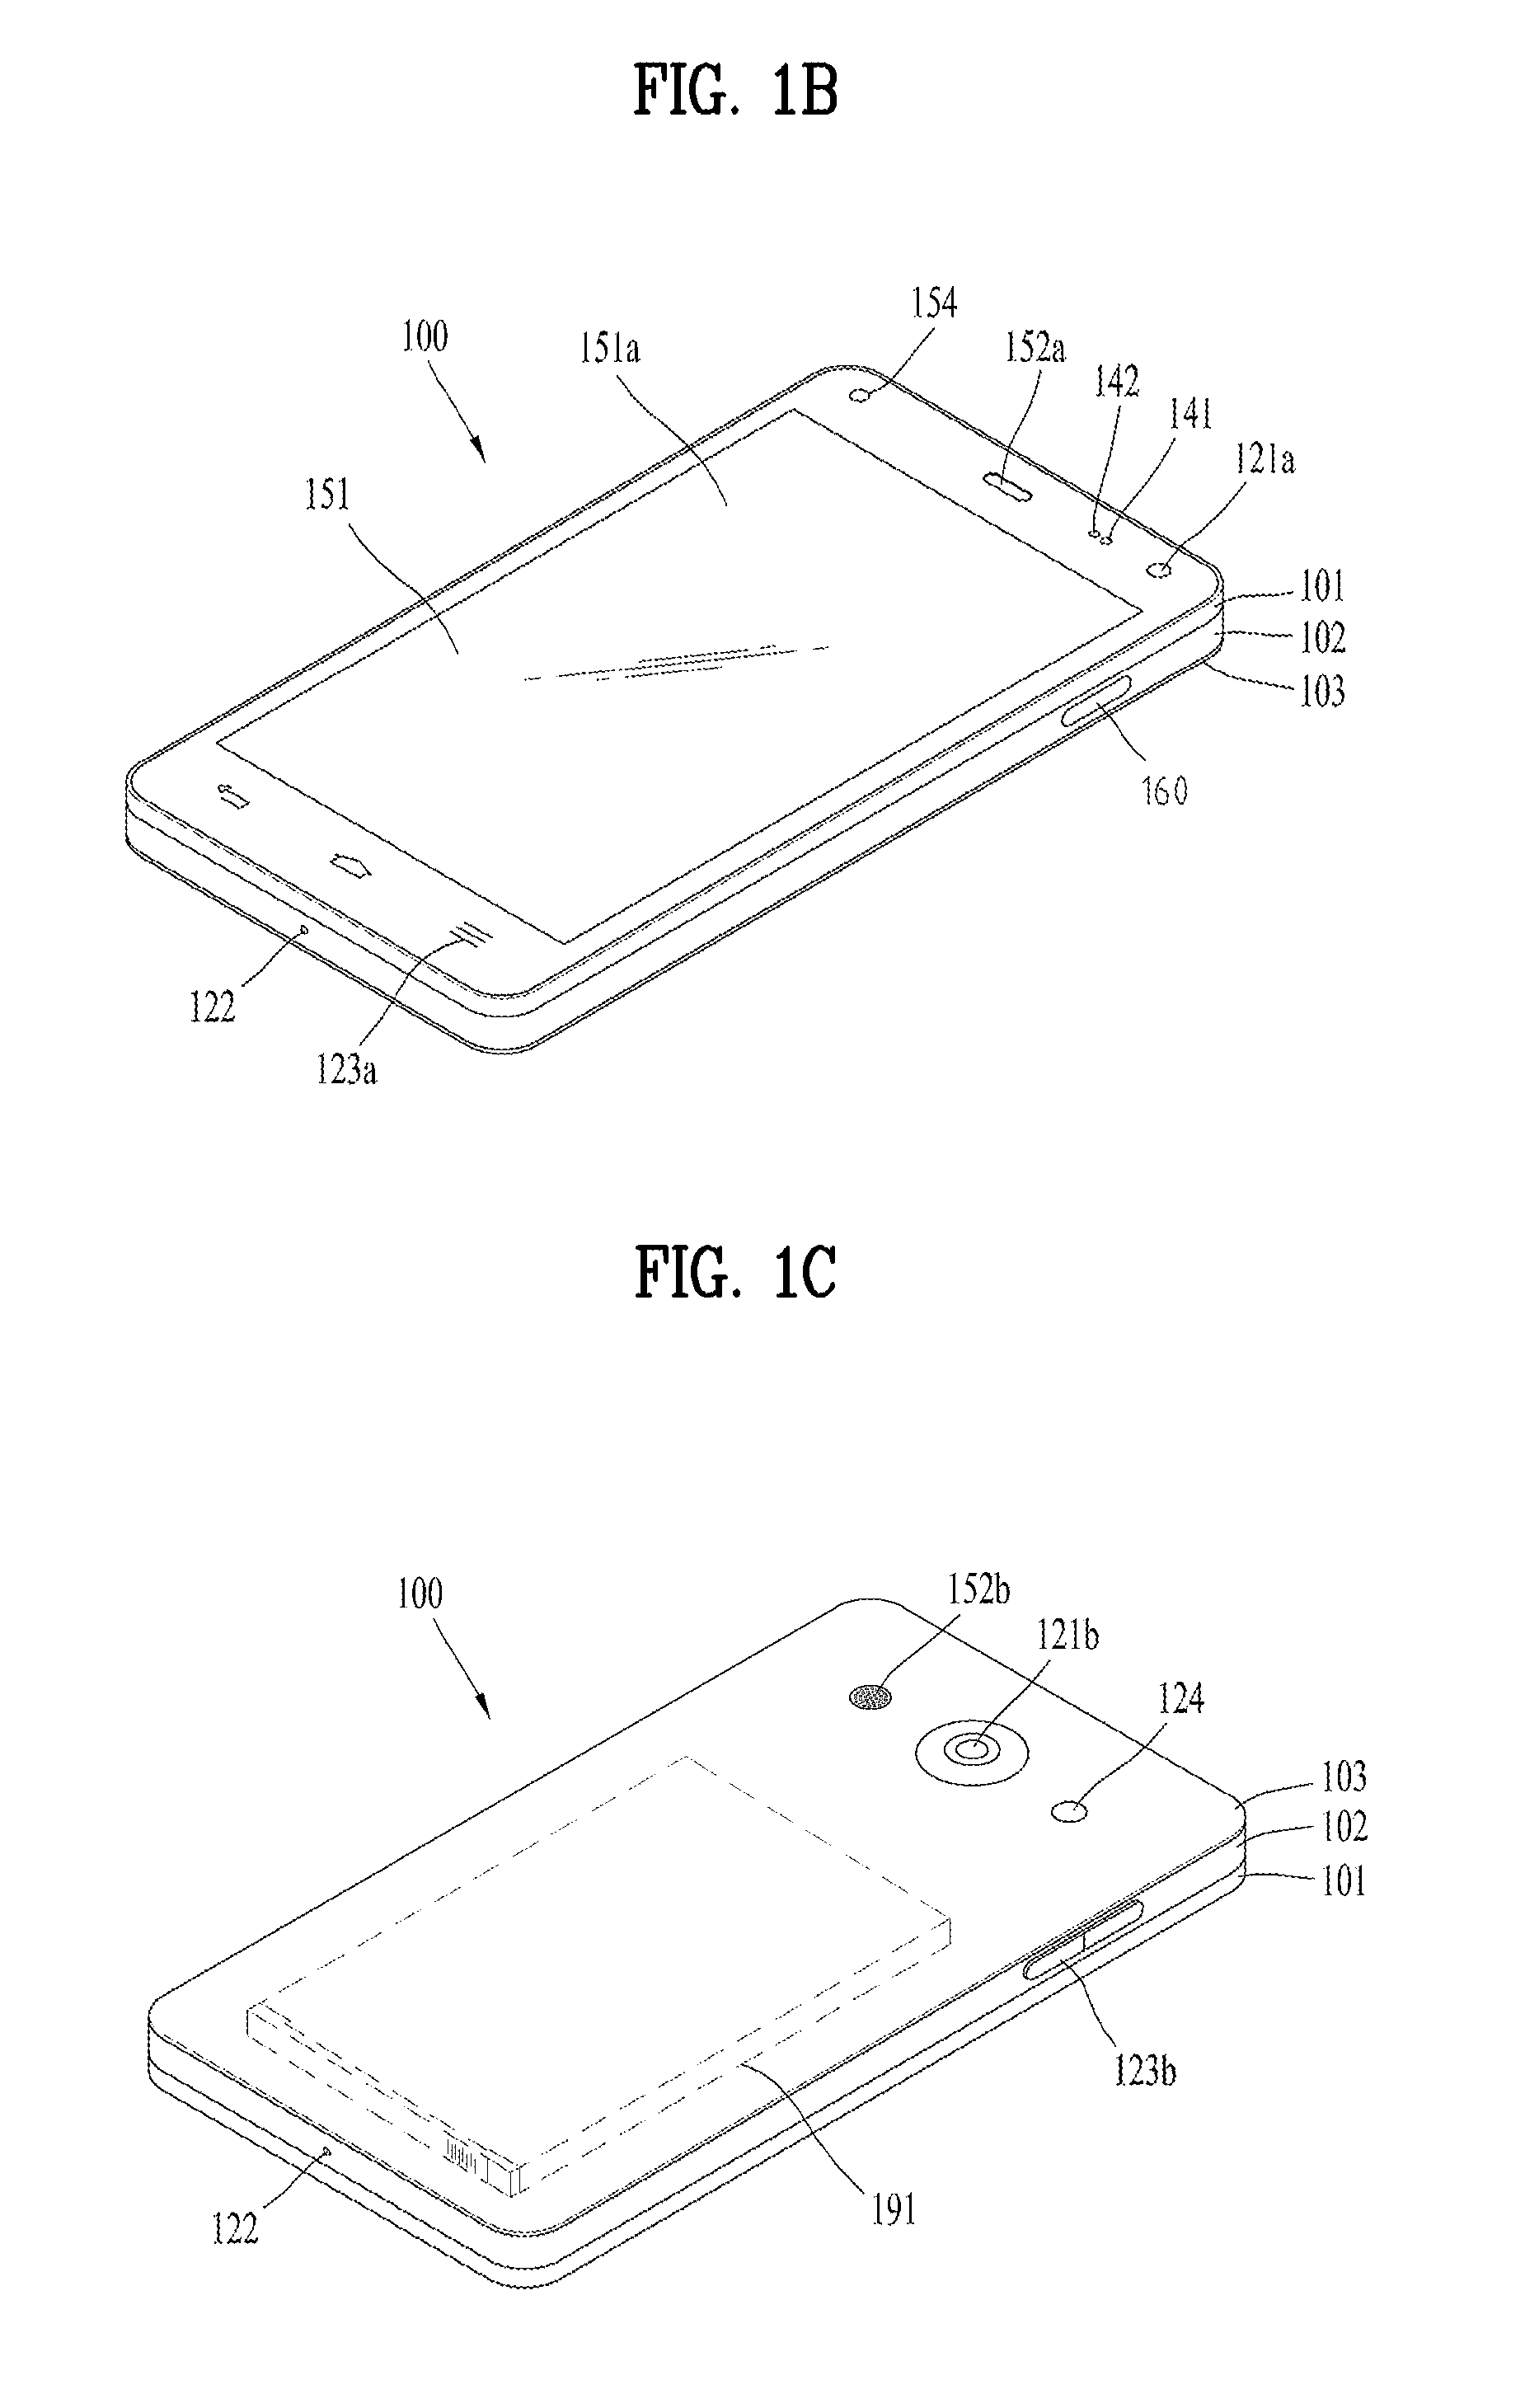 Terminal and method of processing data therein